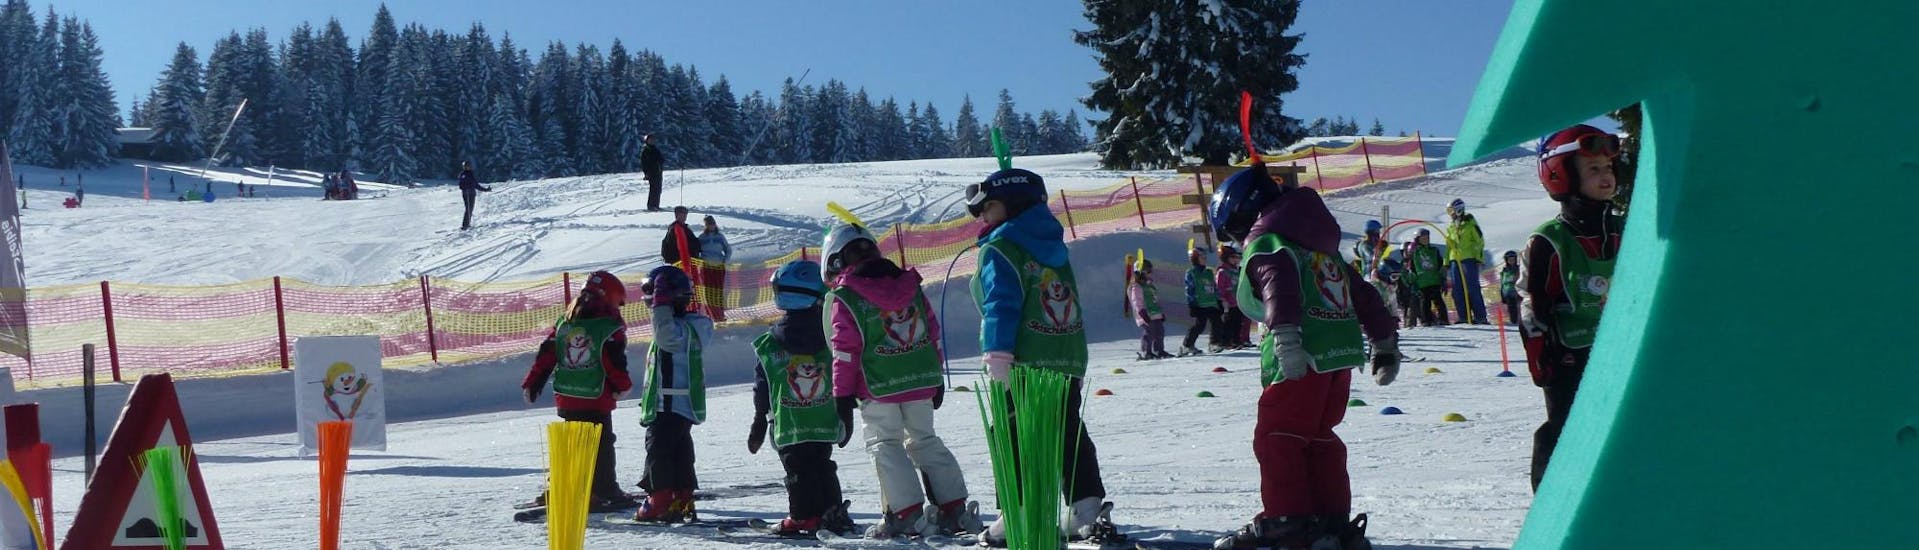 In the children's area of Skischule Steibis the participants of the Kids Ski Lessons (4-15 years) - Morning - First Timer gain their first experience on skis.